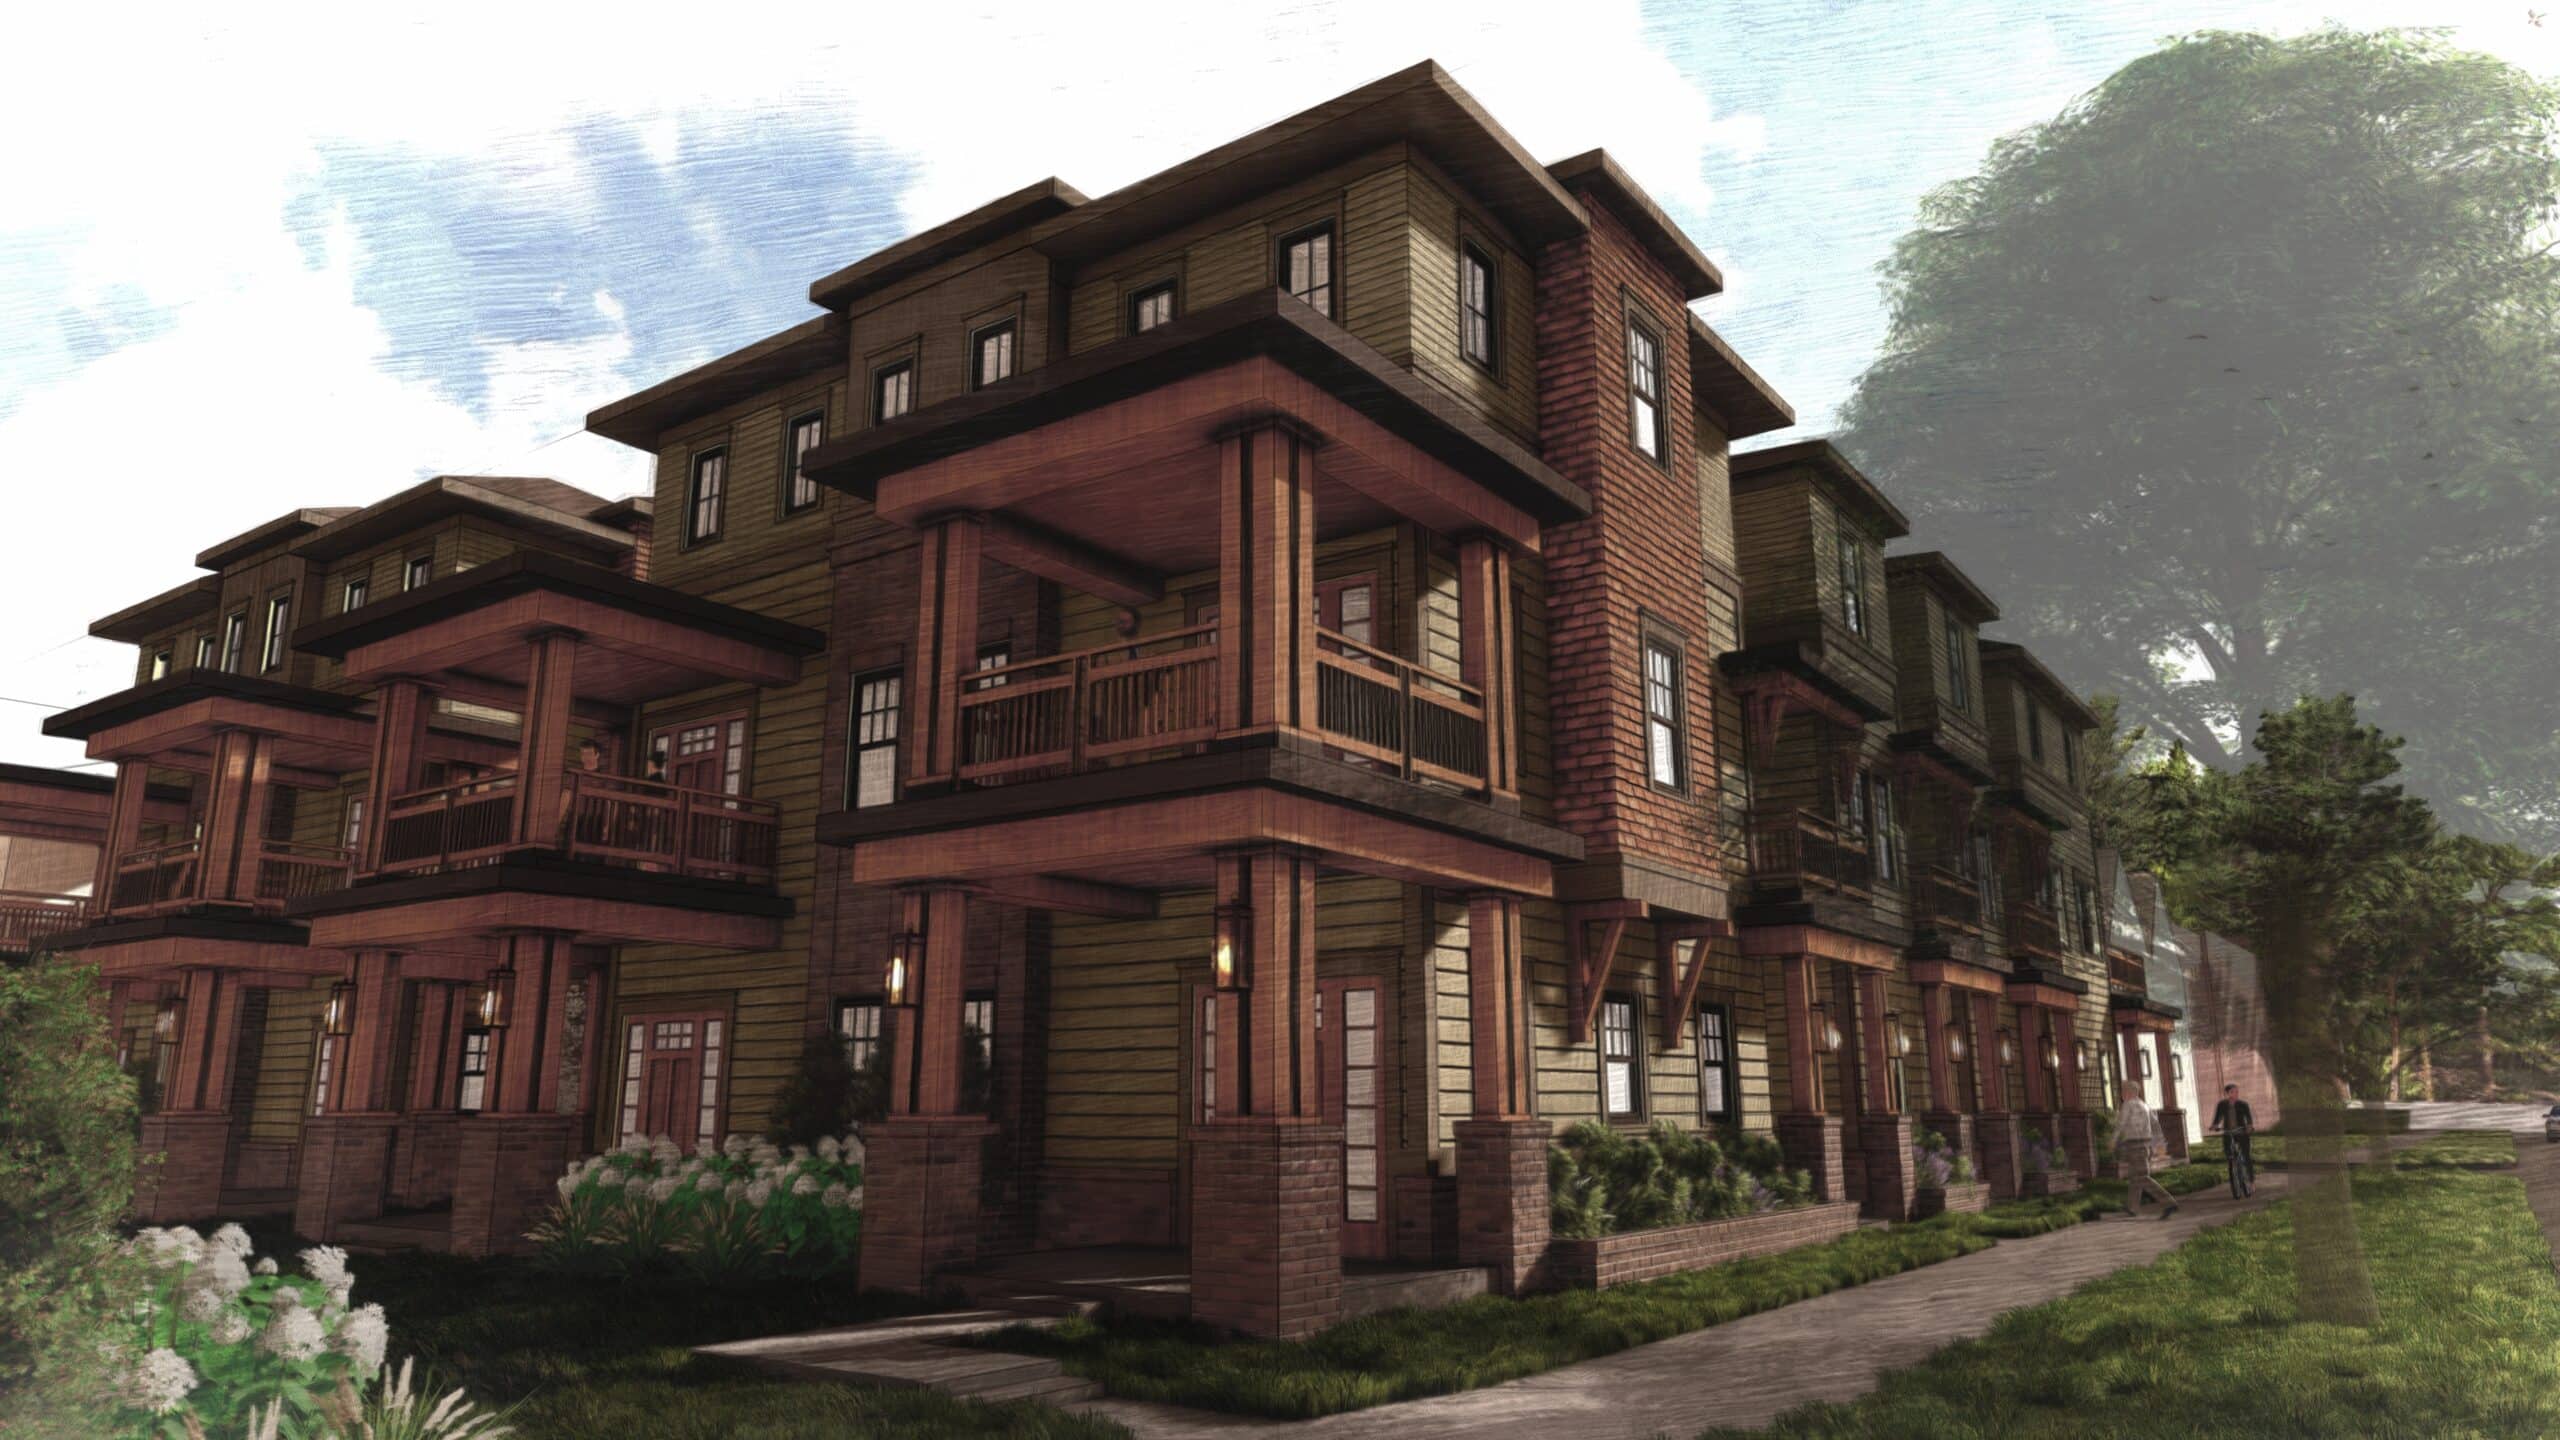 1 - 325 EAST BOULEVARD TOWNHOMES - ROLAND ARCHITECTURE